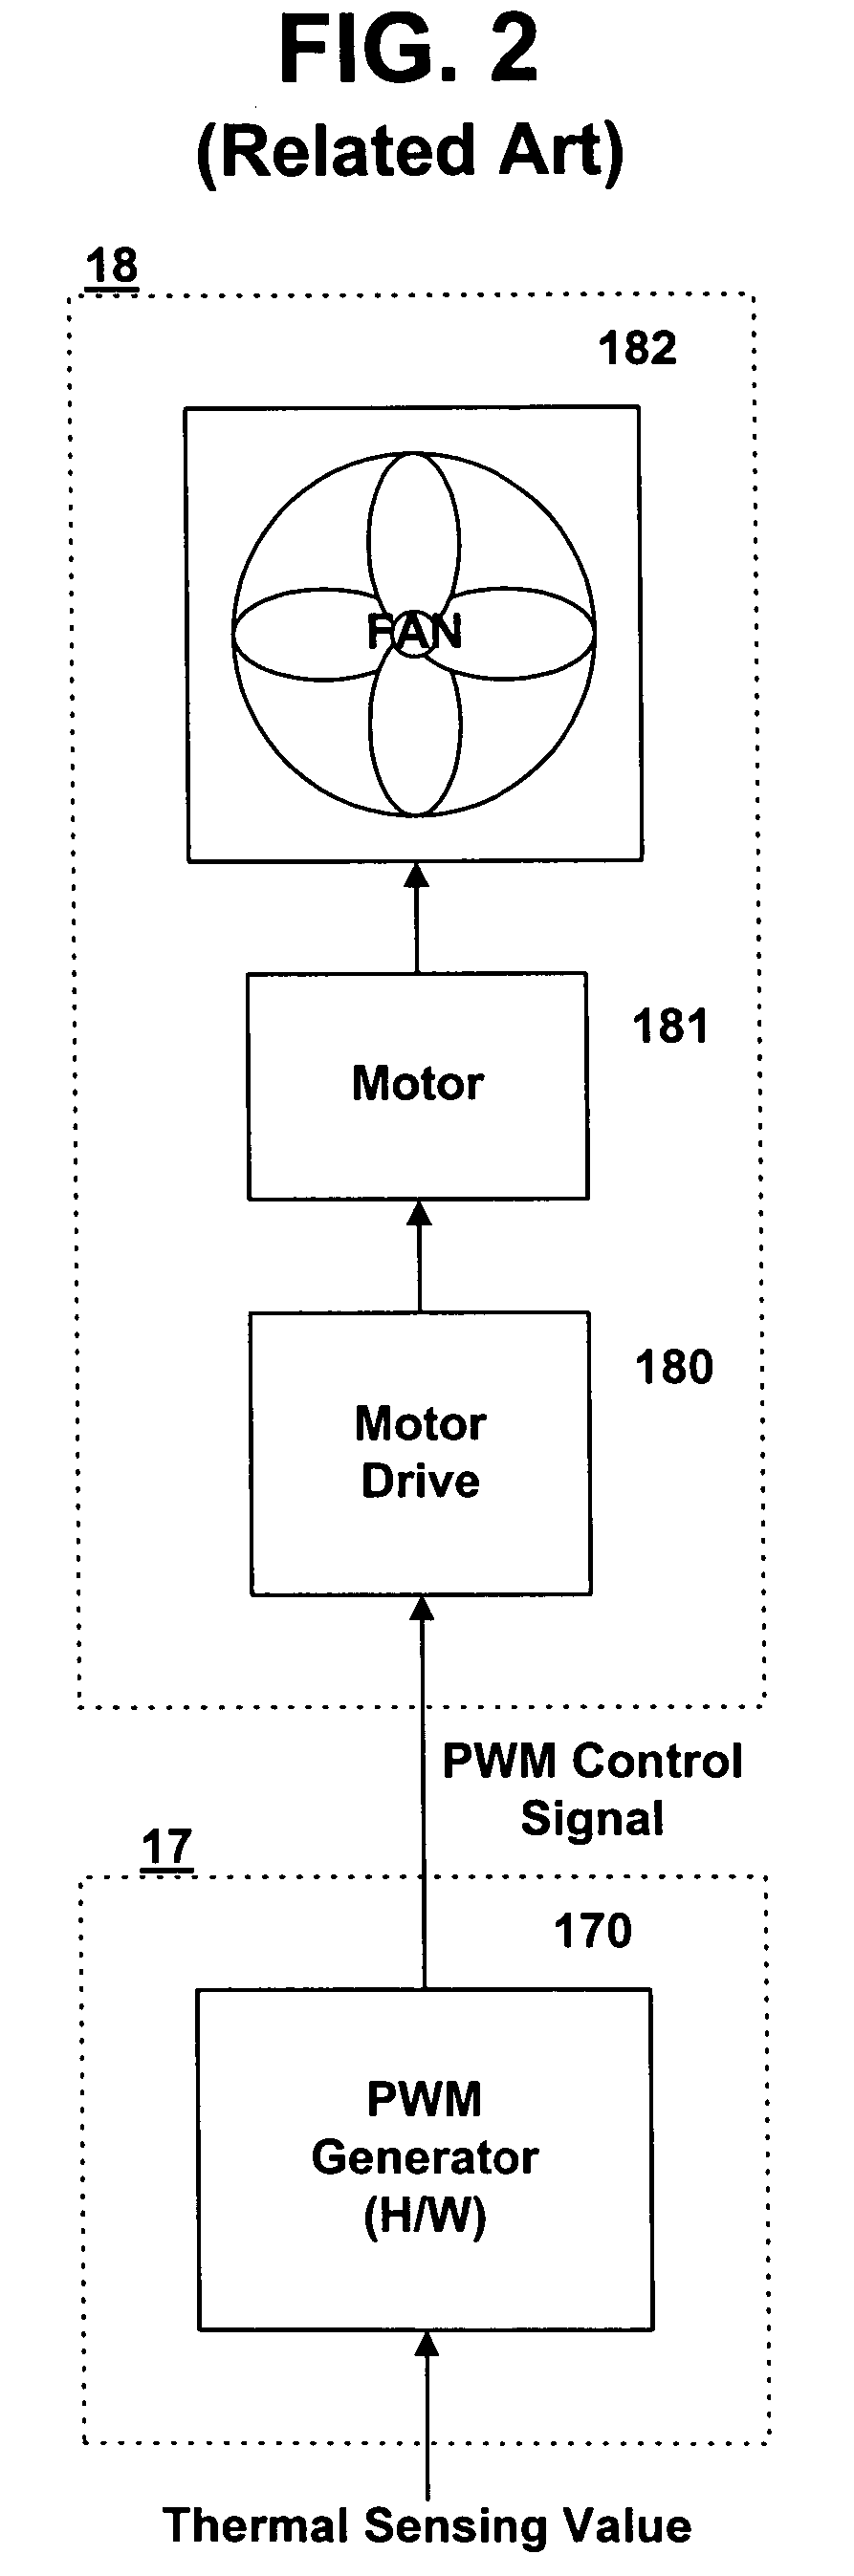 Apparatus and method for controlling fan drive in computer system